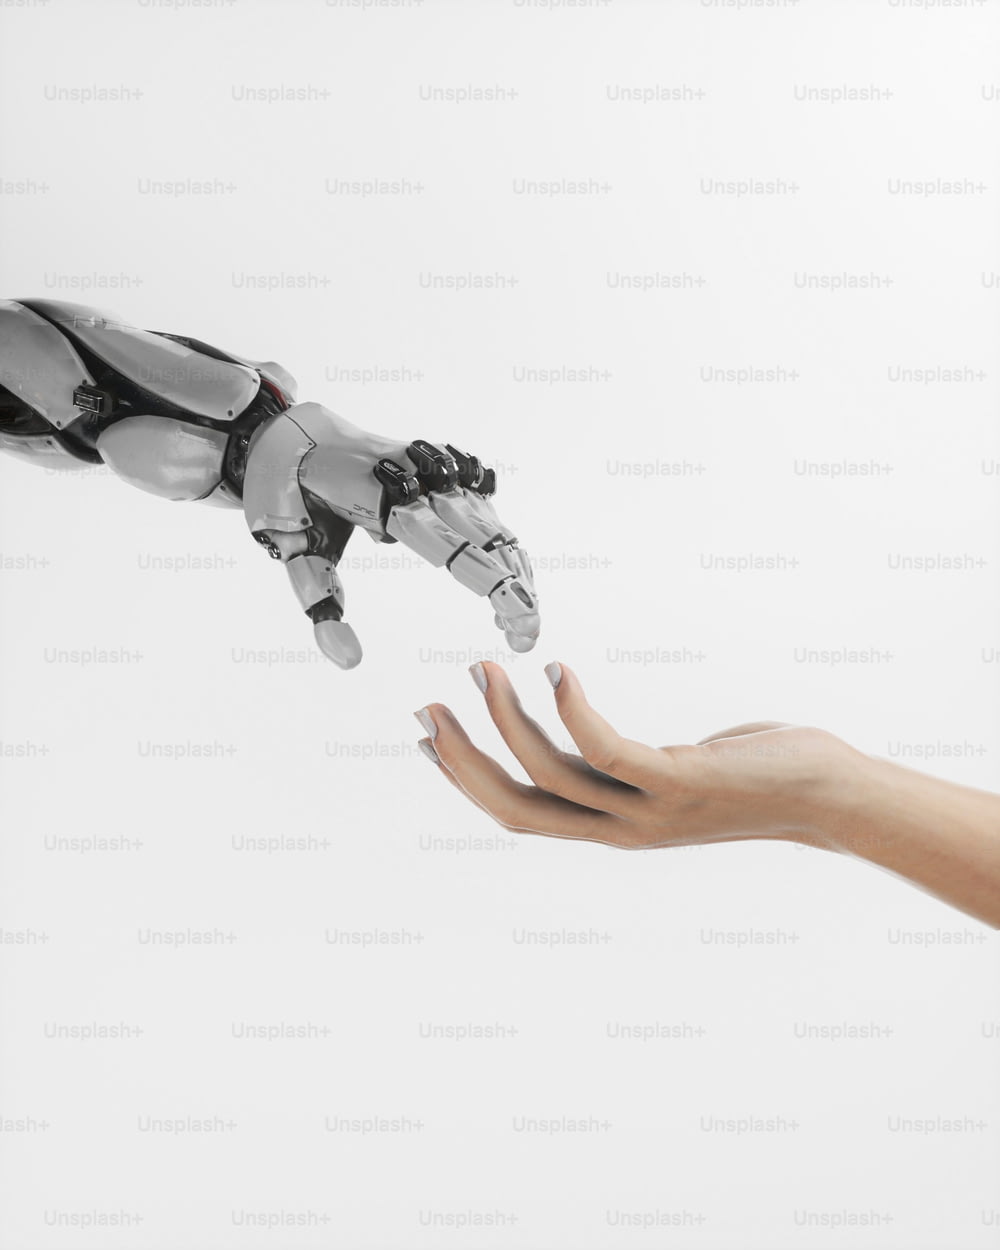 a hand reaching out towards a robot hand